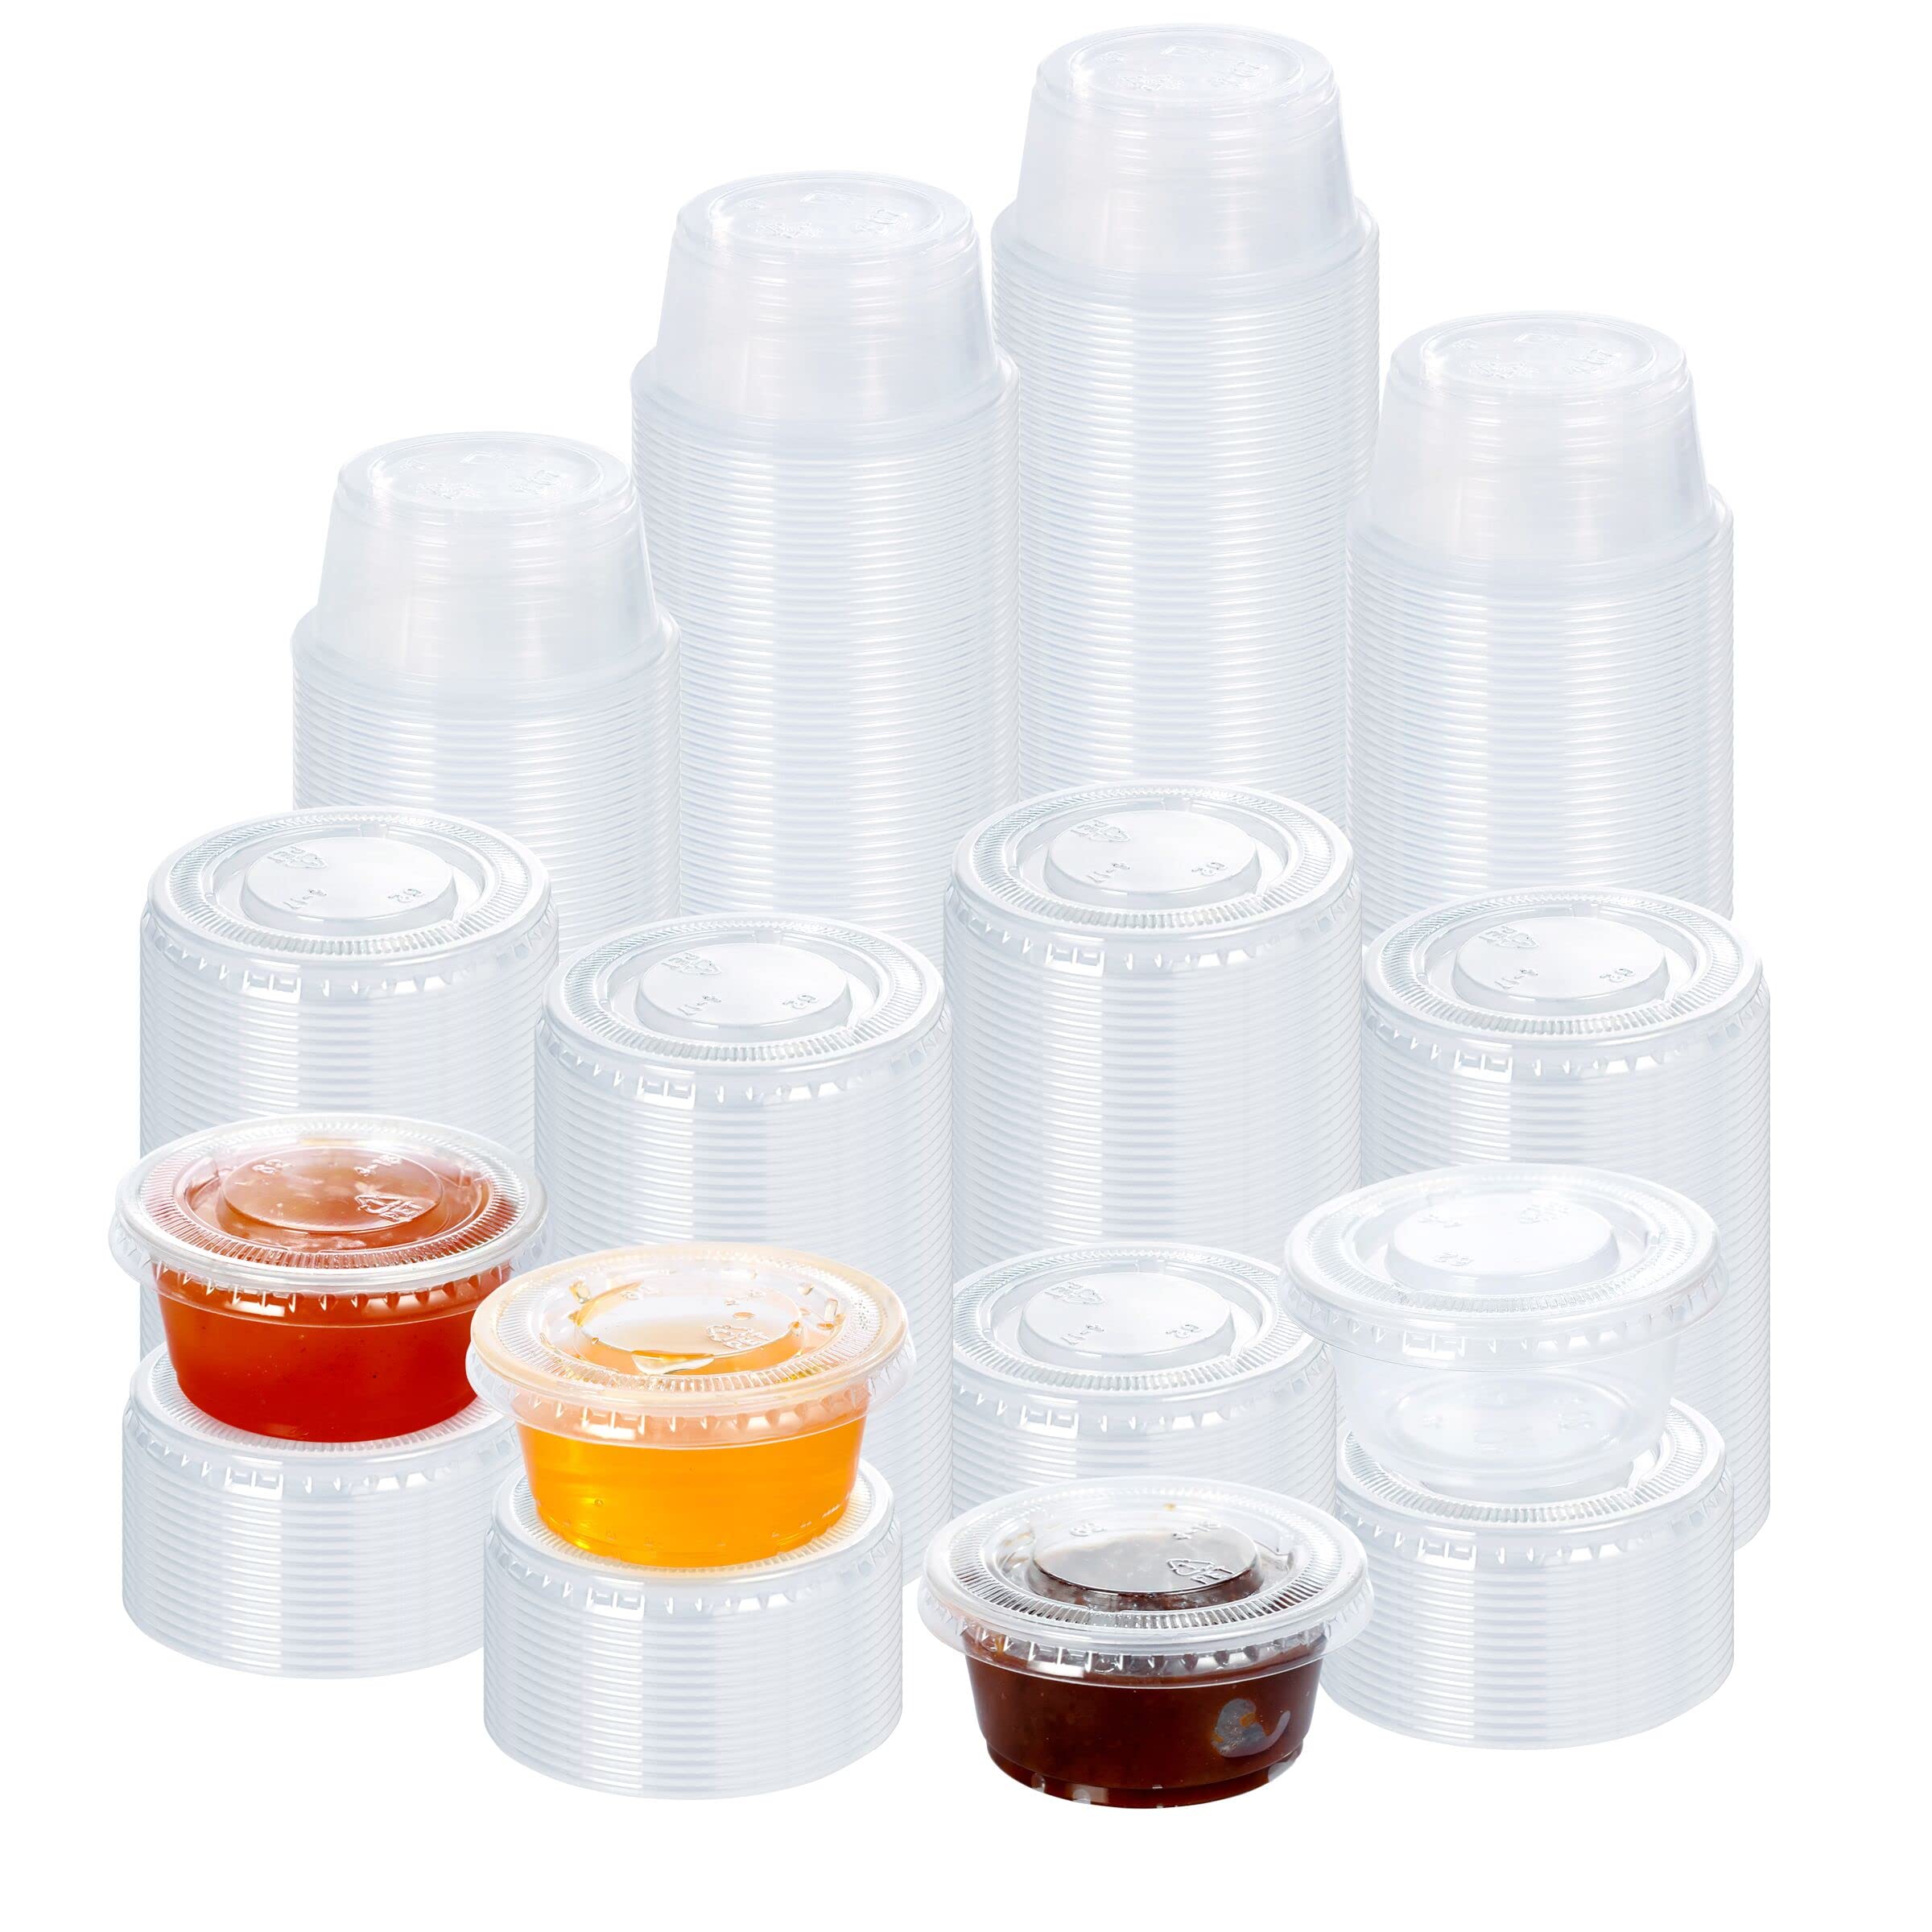 Condiment Cups Containers with Lids- 8 Pk. 1.3 Oz.Salad Dressing Container  to Go